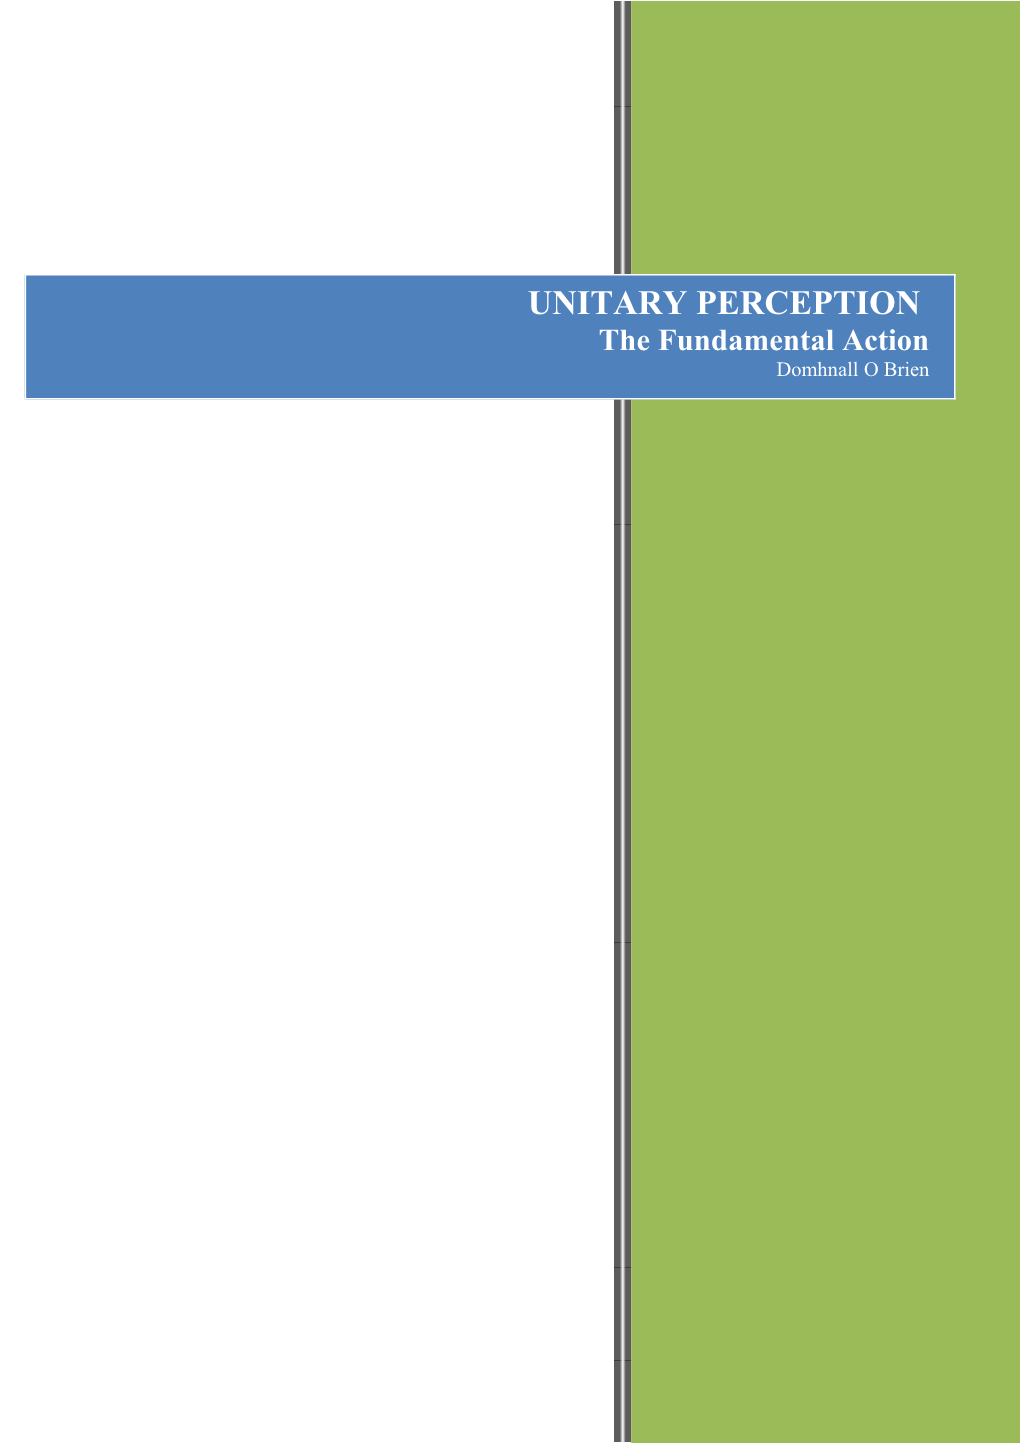 2. Email to a Friend Introducing Unitary Perception 38